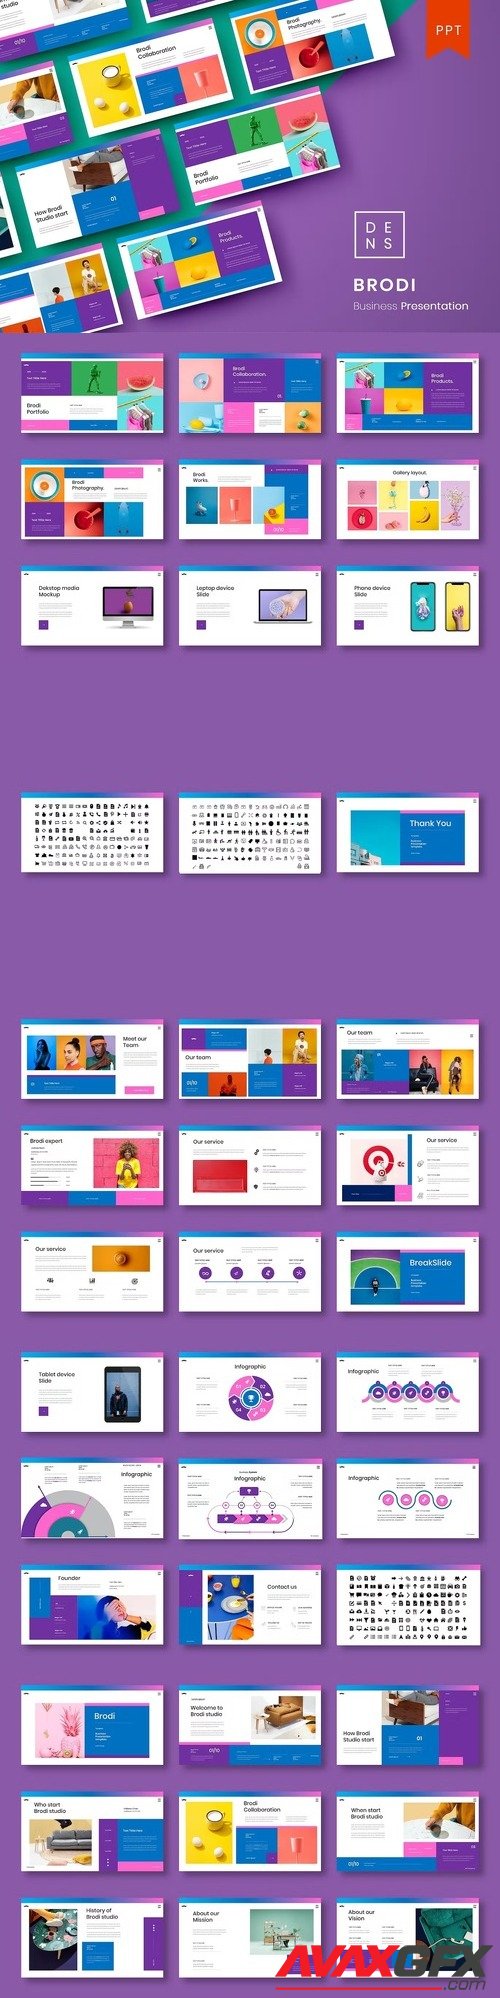 Brodi – Business PowerPoint Template [PPTX]